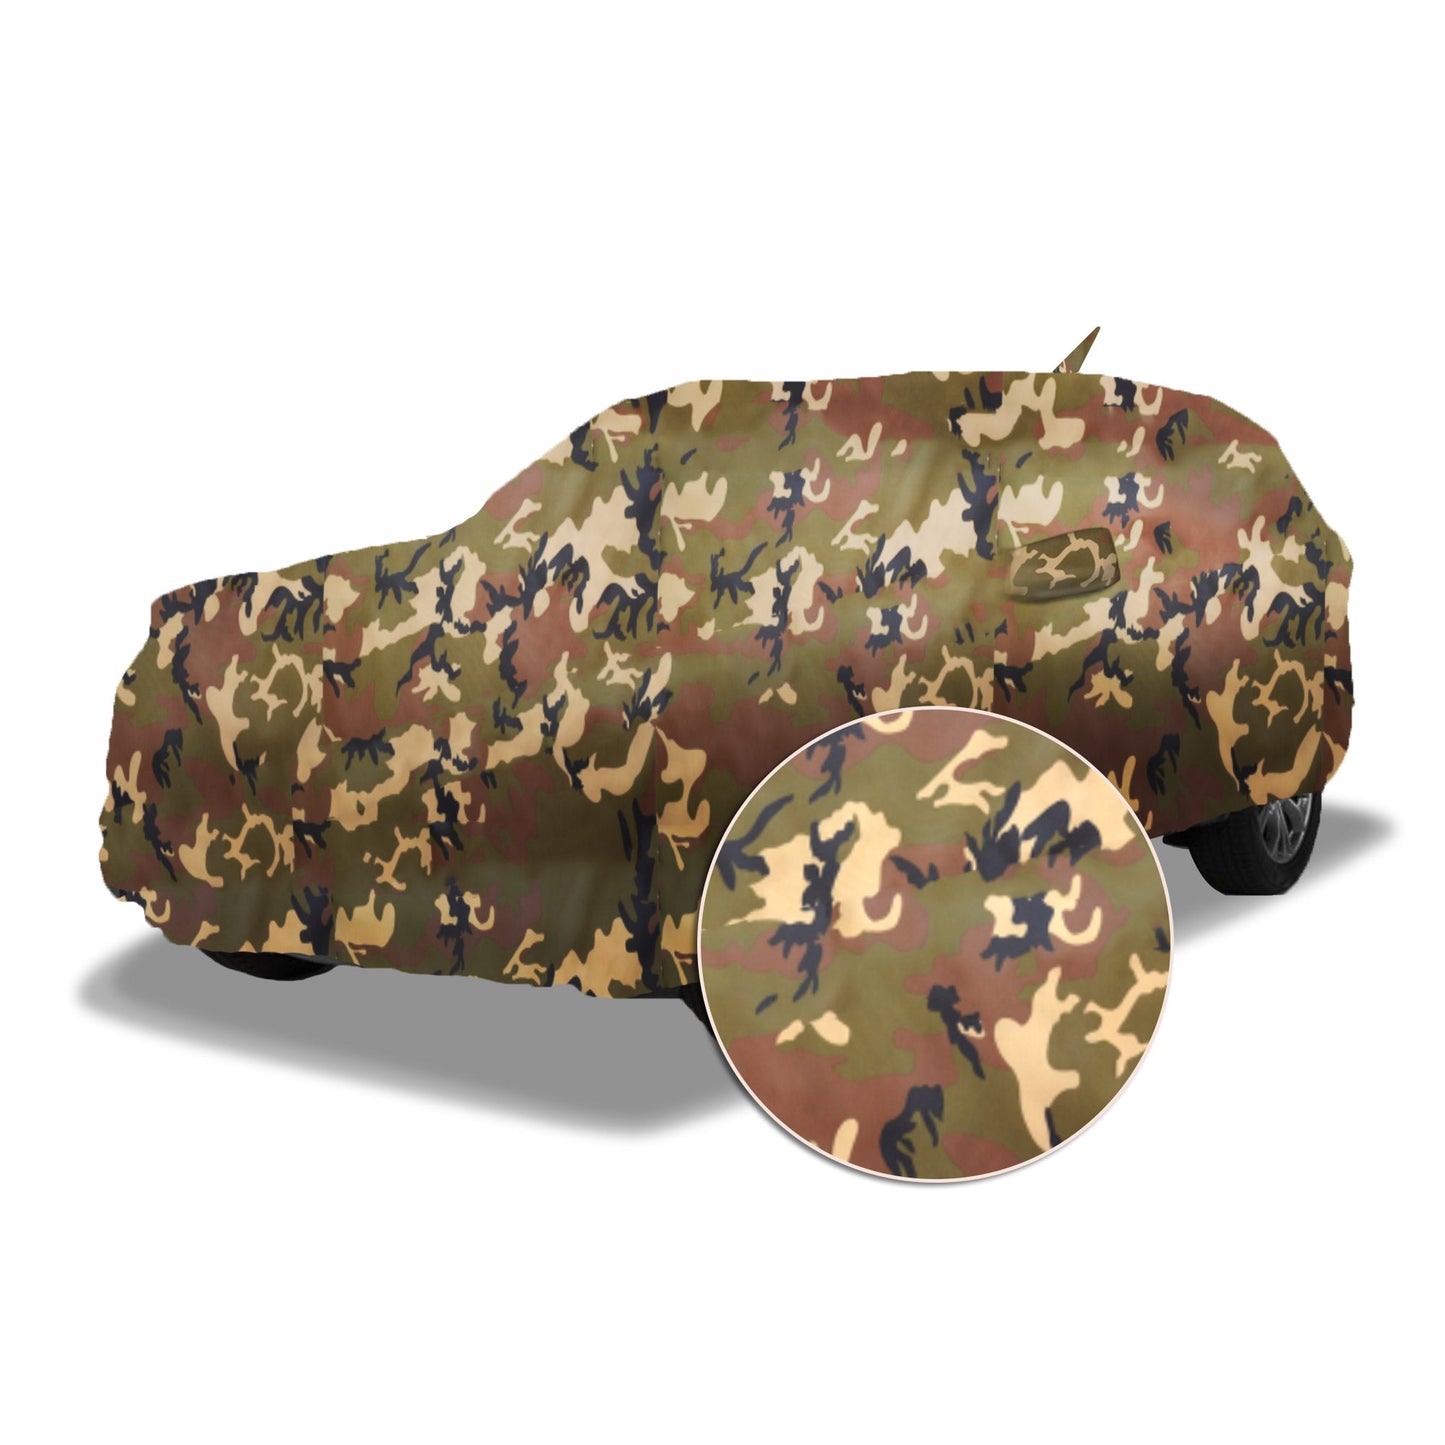 Ascot Mercedes-Benz GLE 2011-2019 Model Car Body Cover Extra Strong & Dust Proof Jungle Military Car Cover with UV Proof & Water-Resistant Coating